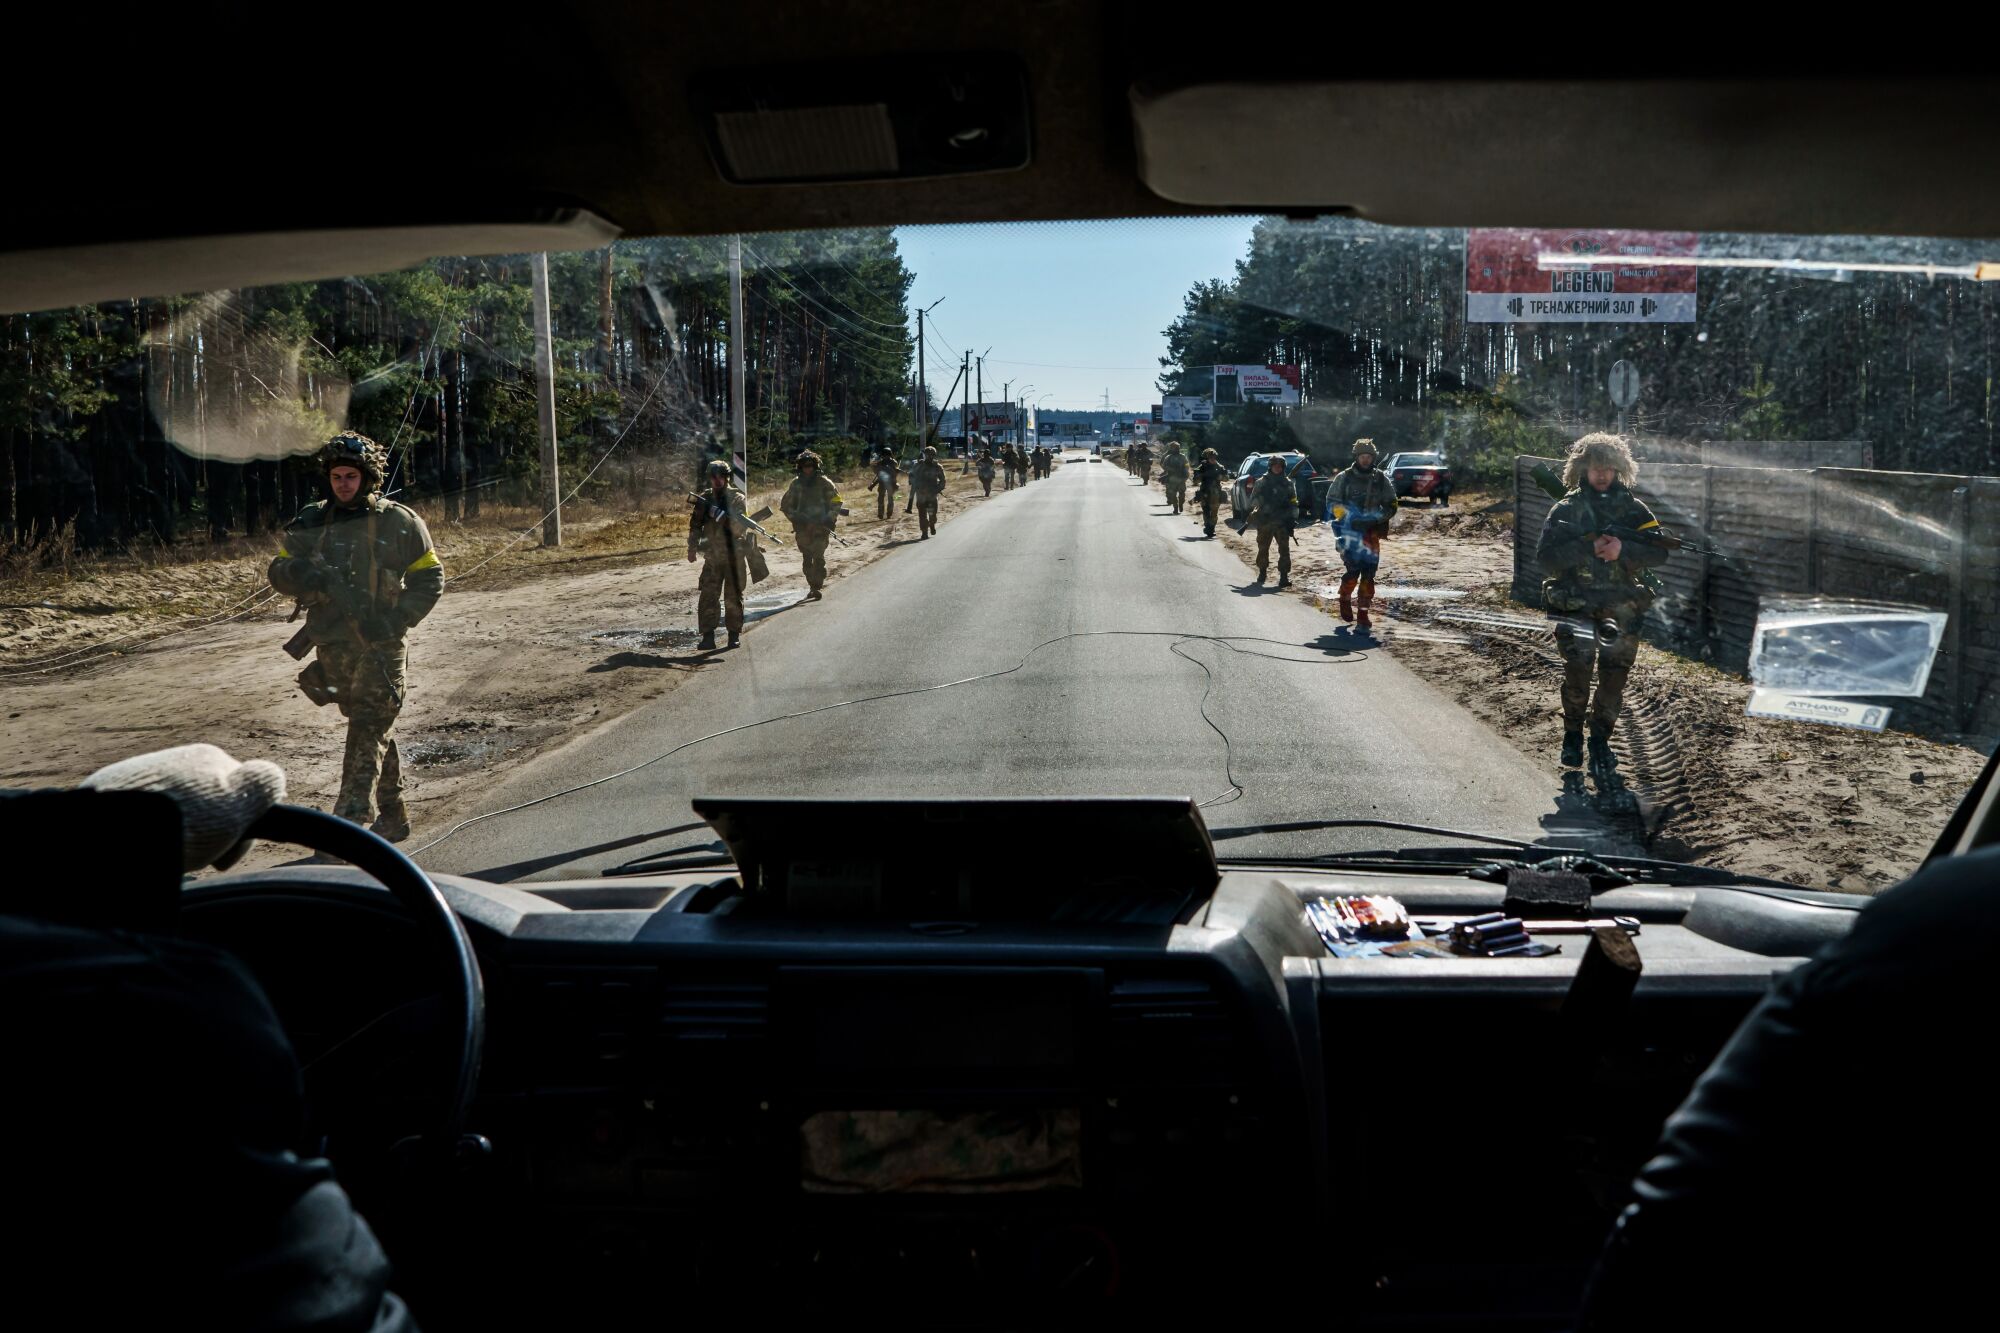 A view through a windshield of armed soldiers marching on either side of the road.